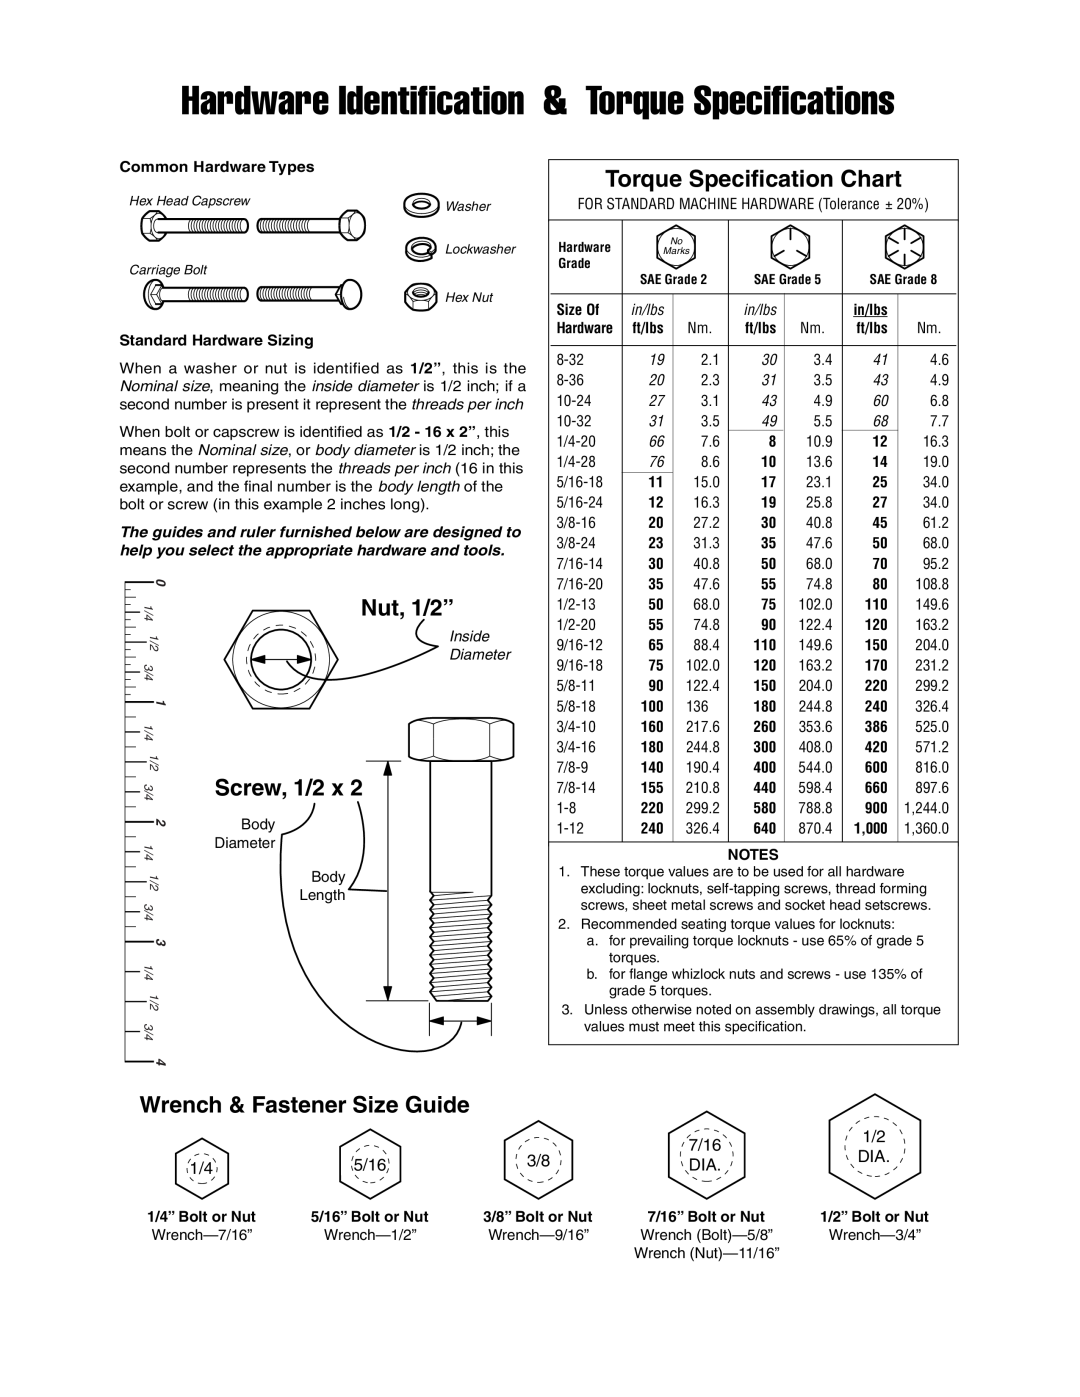 Simplicity 1695076 Wrench & Fastener Size Guide, 7/16, 5/16, Hardware Identification & Torque Specifications, Nut, 1/2” 